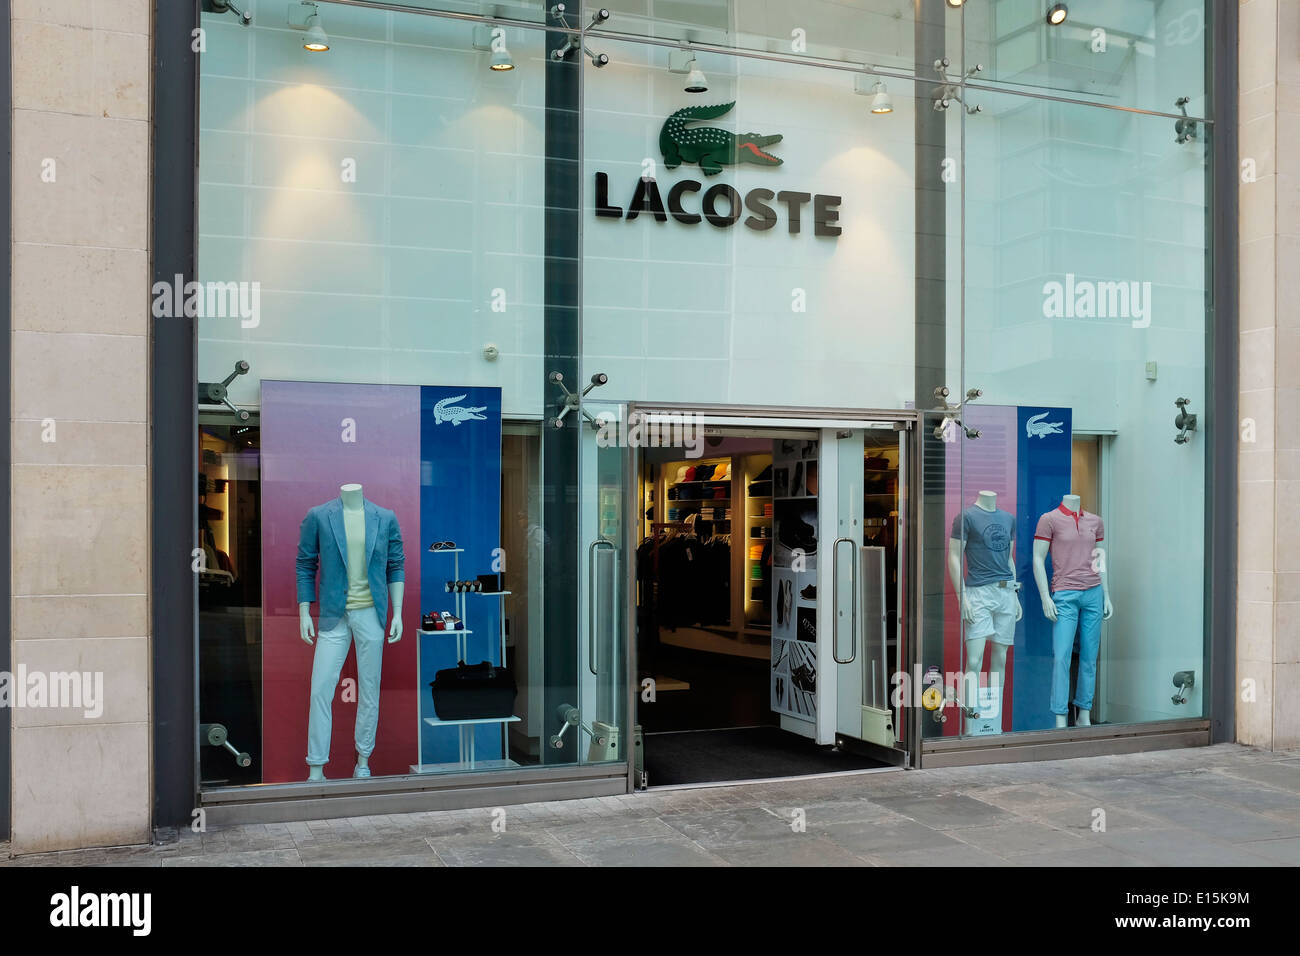 Retail Fashion Chain High Resolution Stock Photography and Images - Alamy